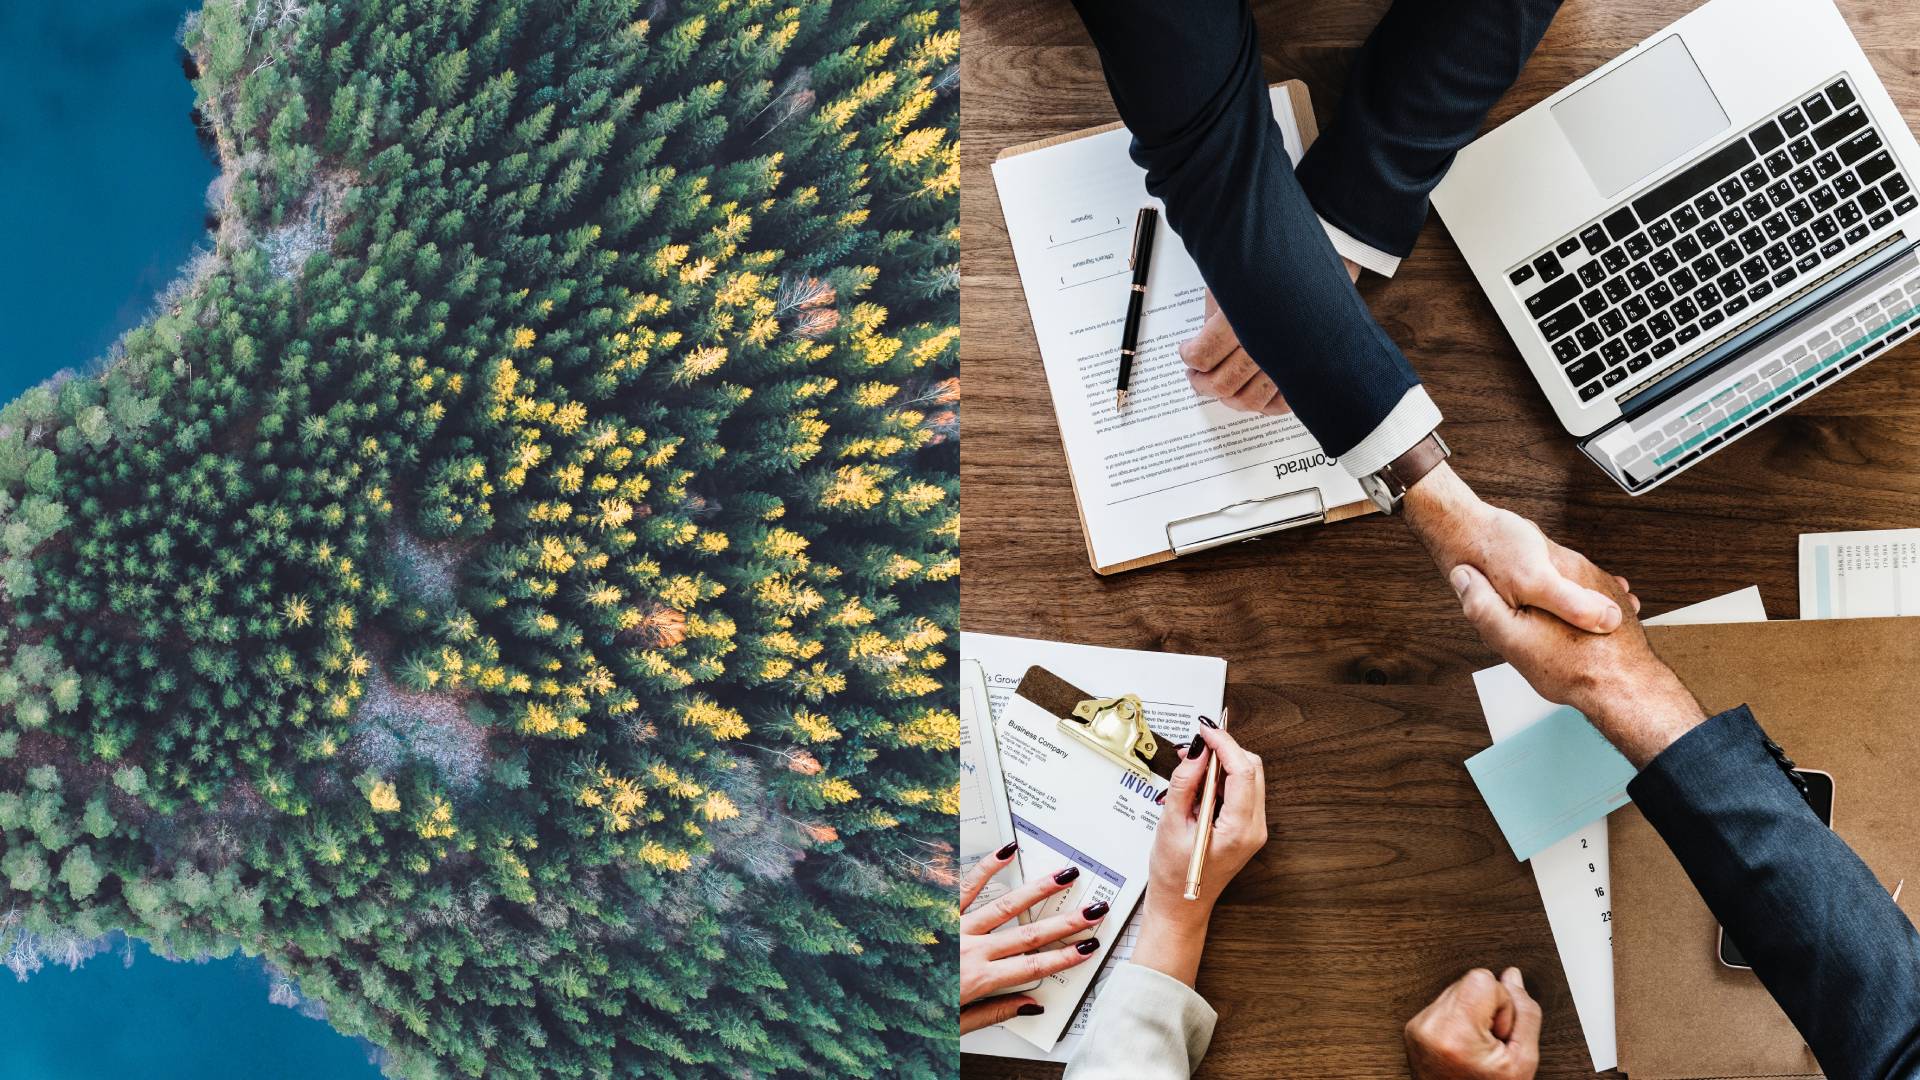 Photo collage: A forest and a lake from above. Two men shaking hands across a table.